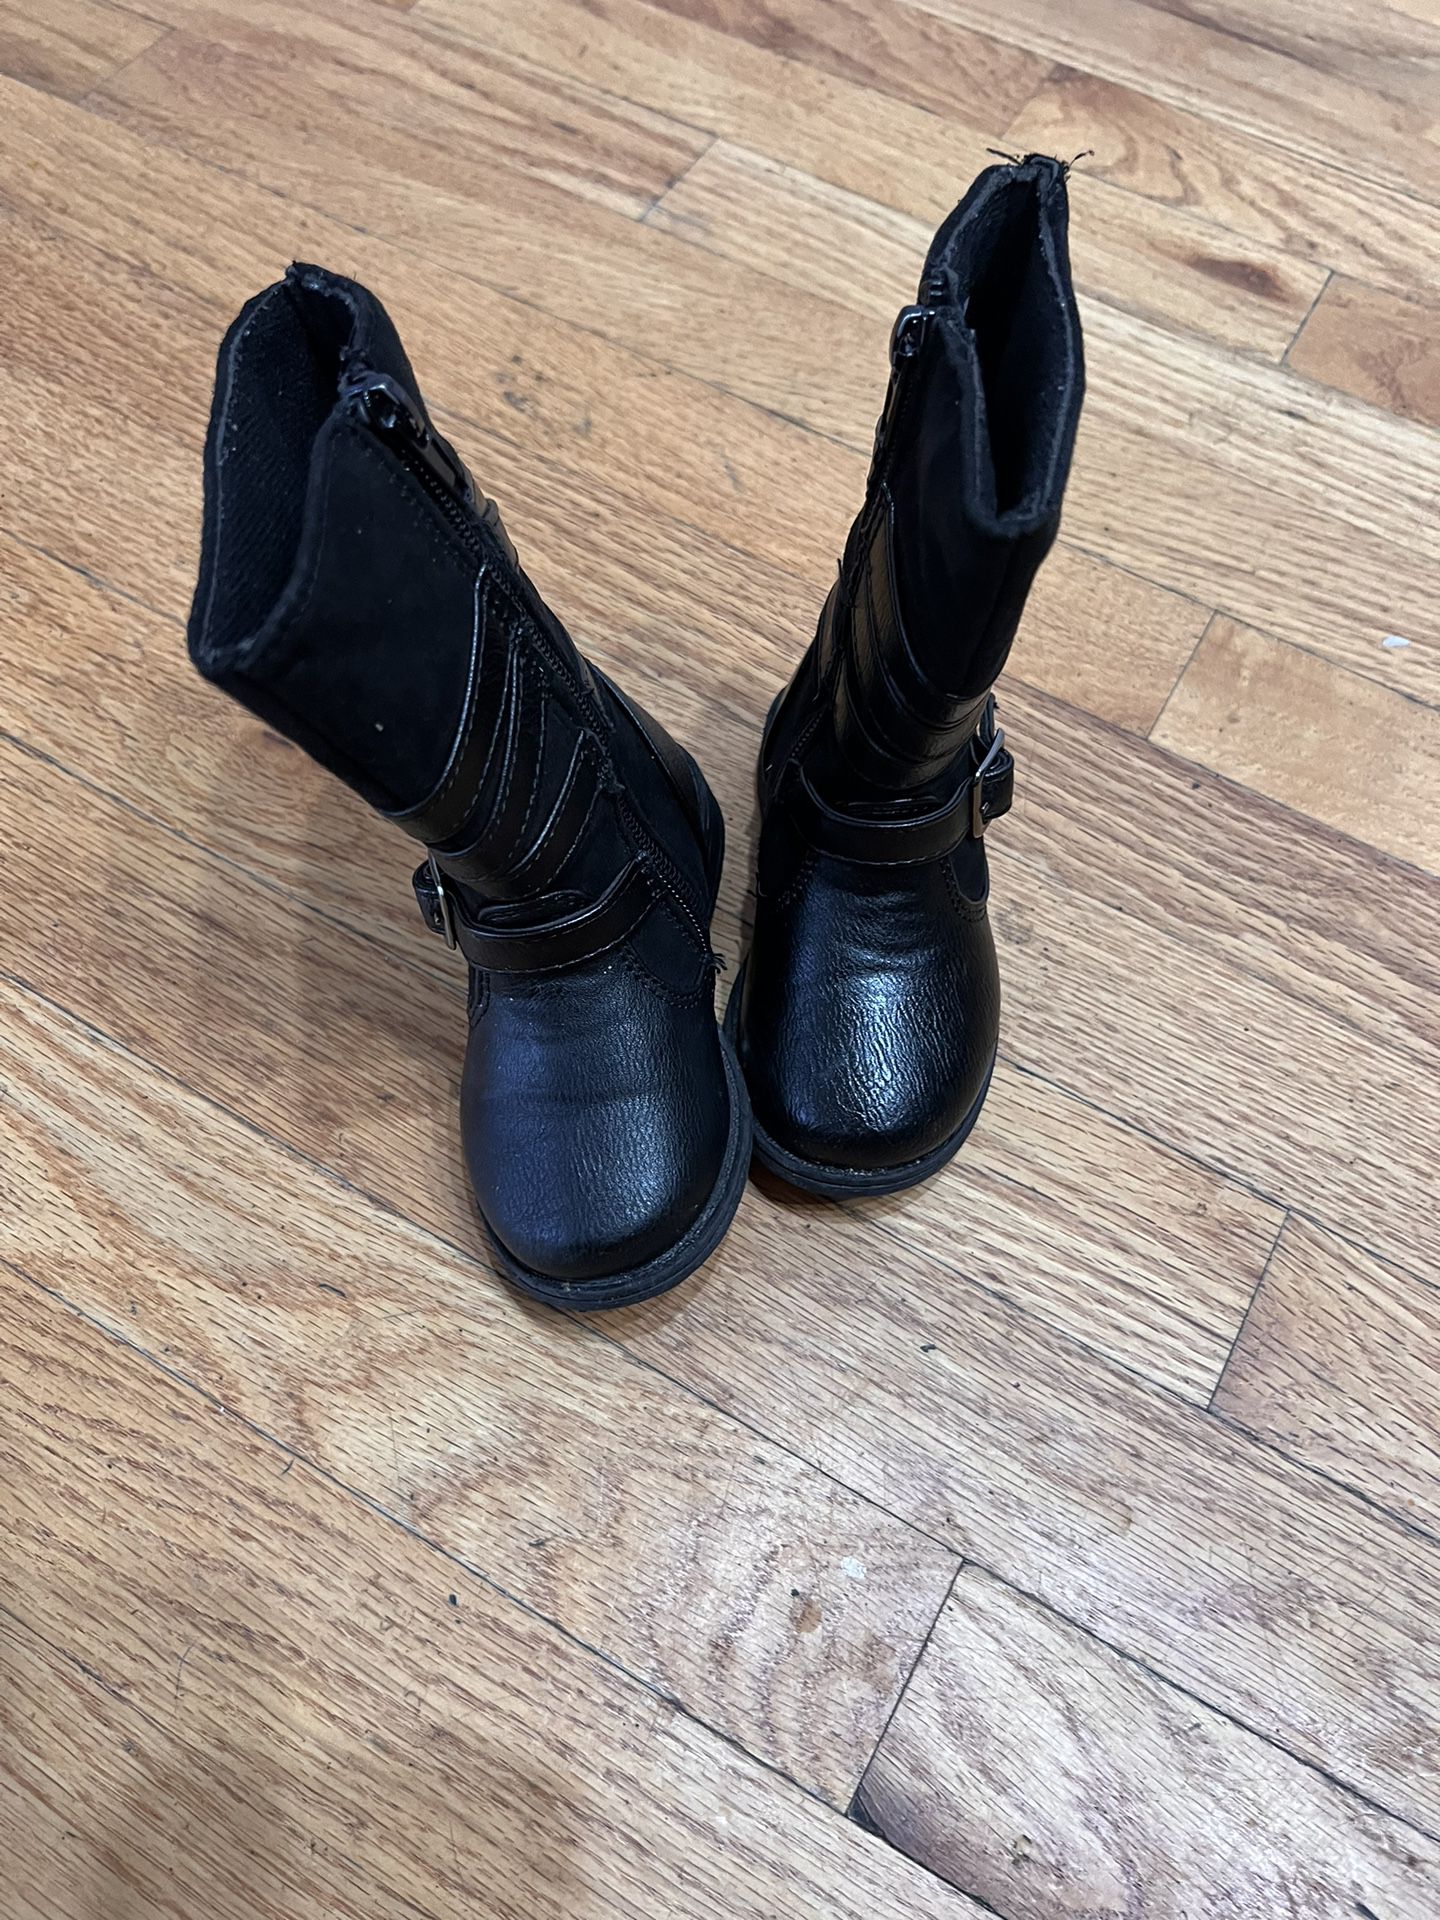 Toddler Size 5 Riding Boots